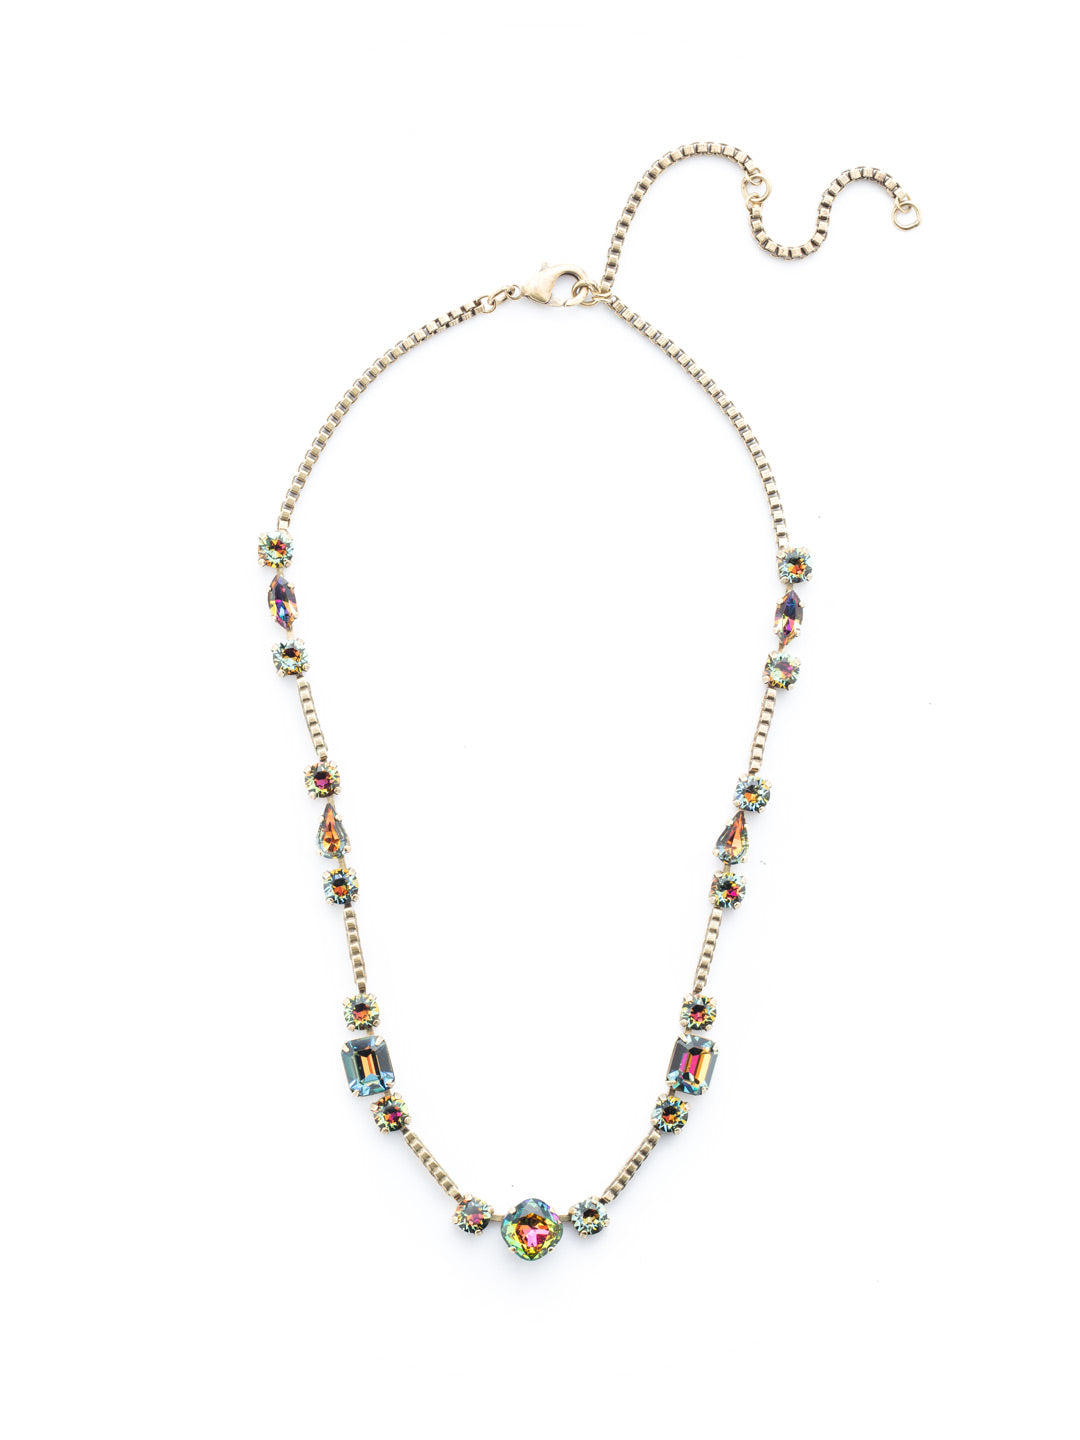 Poppy Tennis Necklace - NEN18AGVO - <p>The Poppy Tennis Necklace is anything but ordinary. Wear it all when you combine classic, baguette and navette sparklers. It's structured and sophisticated. From Sorrelli's Volcano collection in our Antique Gold-tone finish.</p>